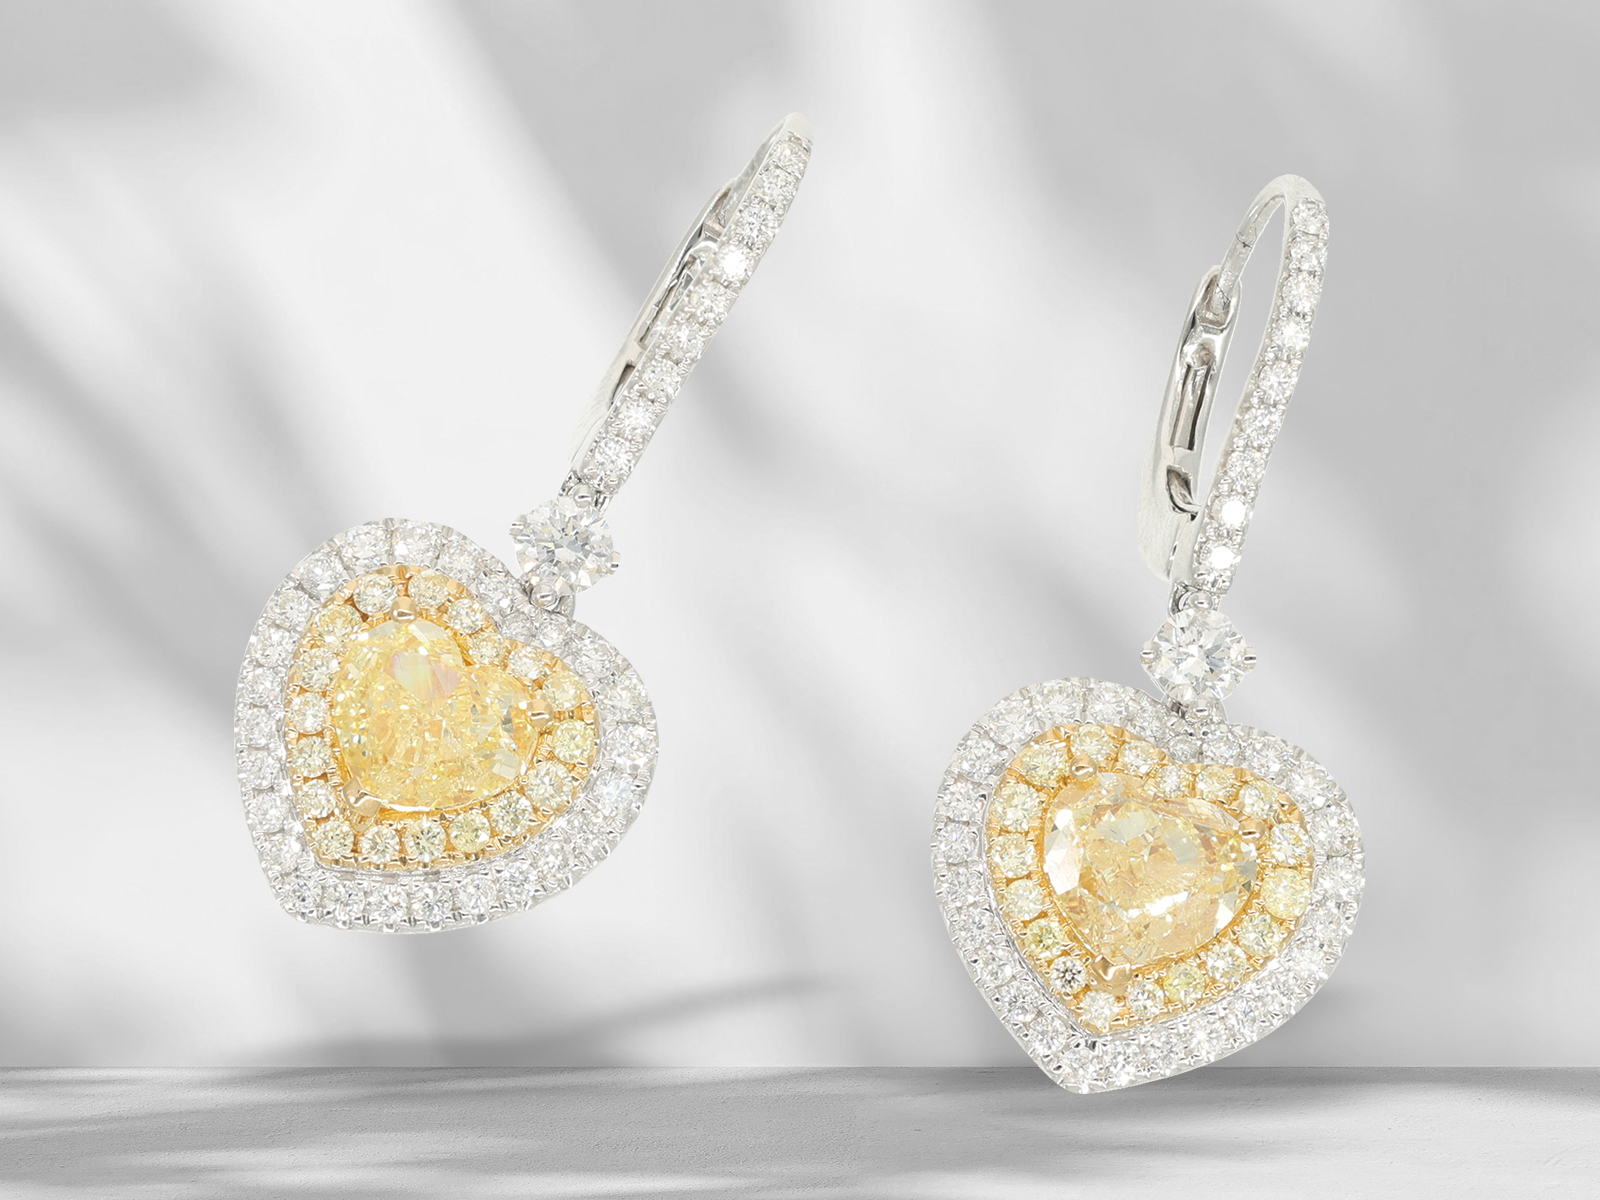 Earrings: High quality earrings set with brilliant-cut diamonds, 2 x 1ct fancy light yellow - Image 3 of 8